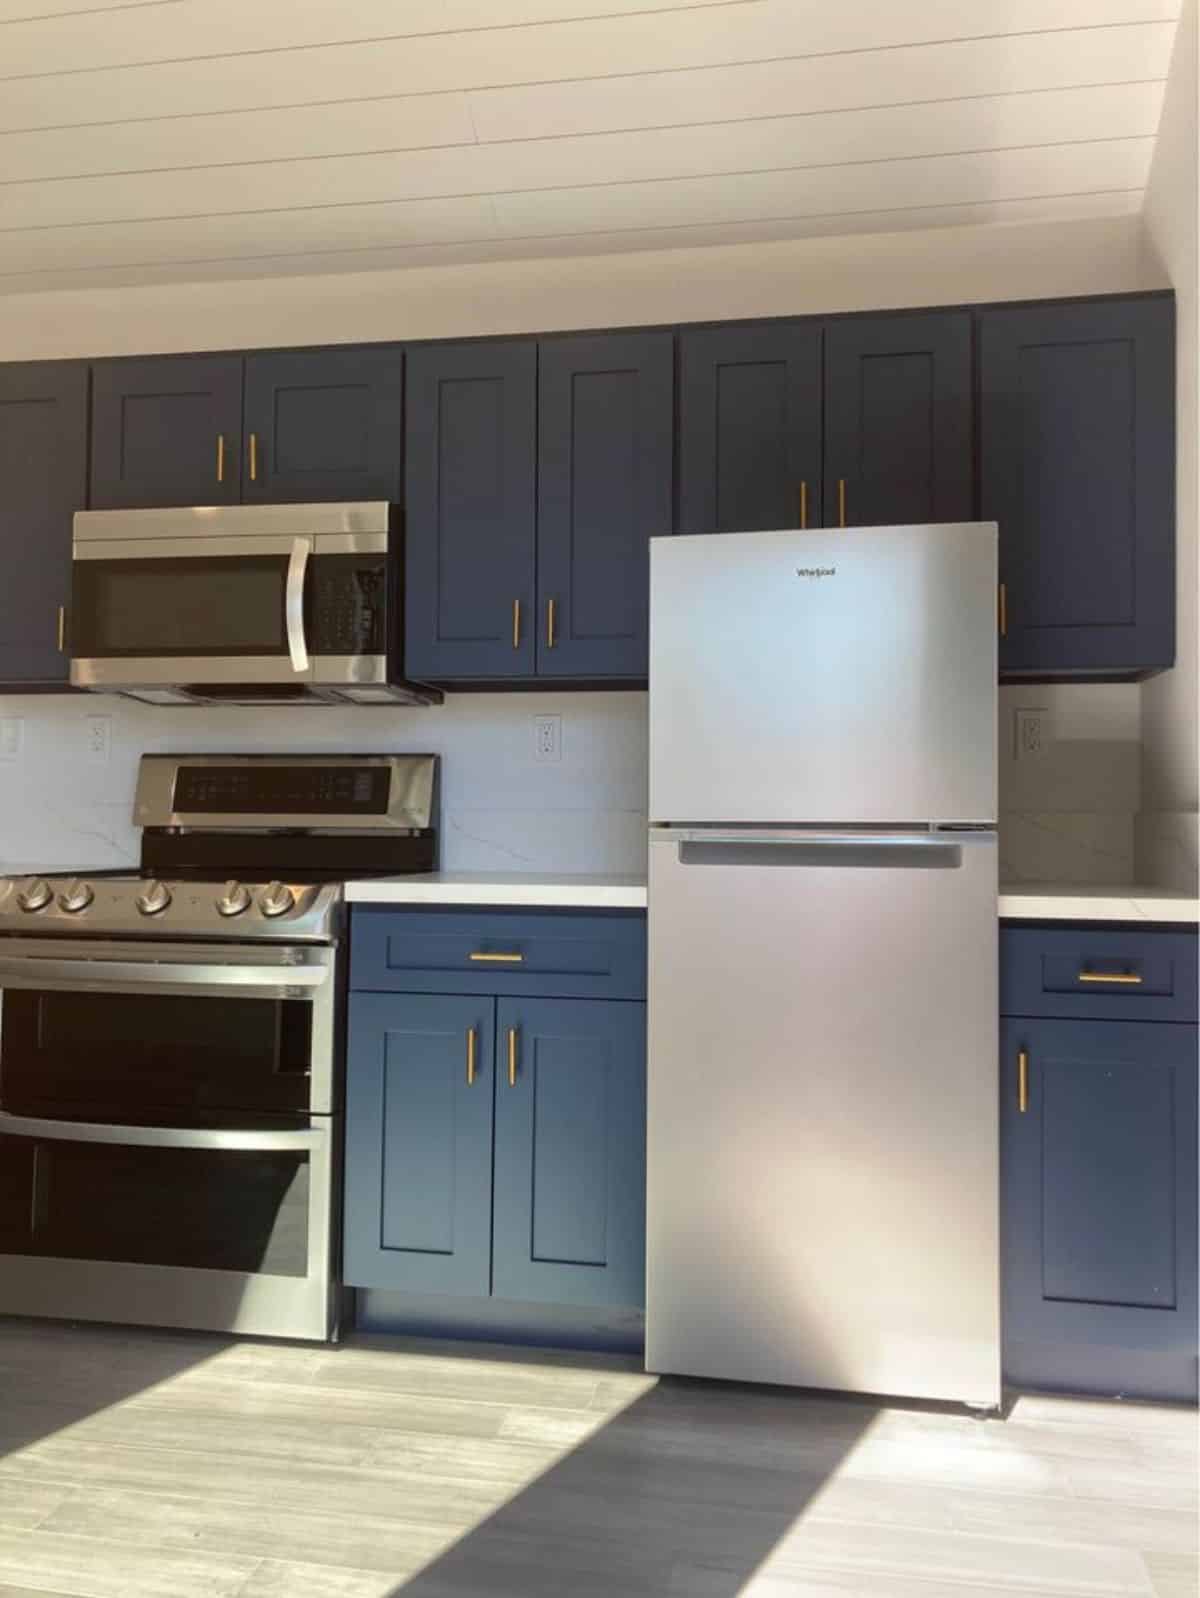 Blue colored kohler kitchen looks stunning with full length refrigerator, microwave oven cum burner and storage